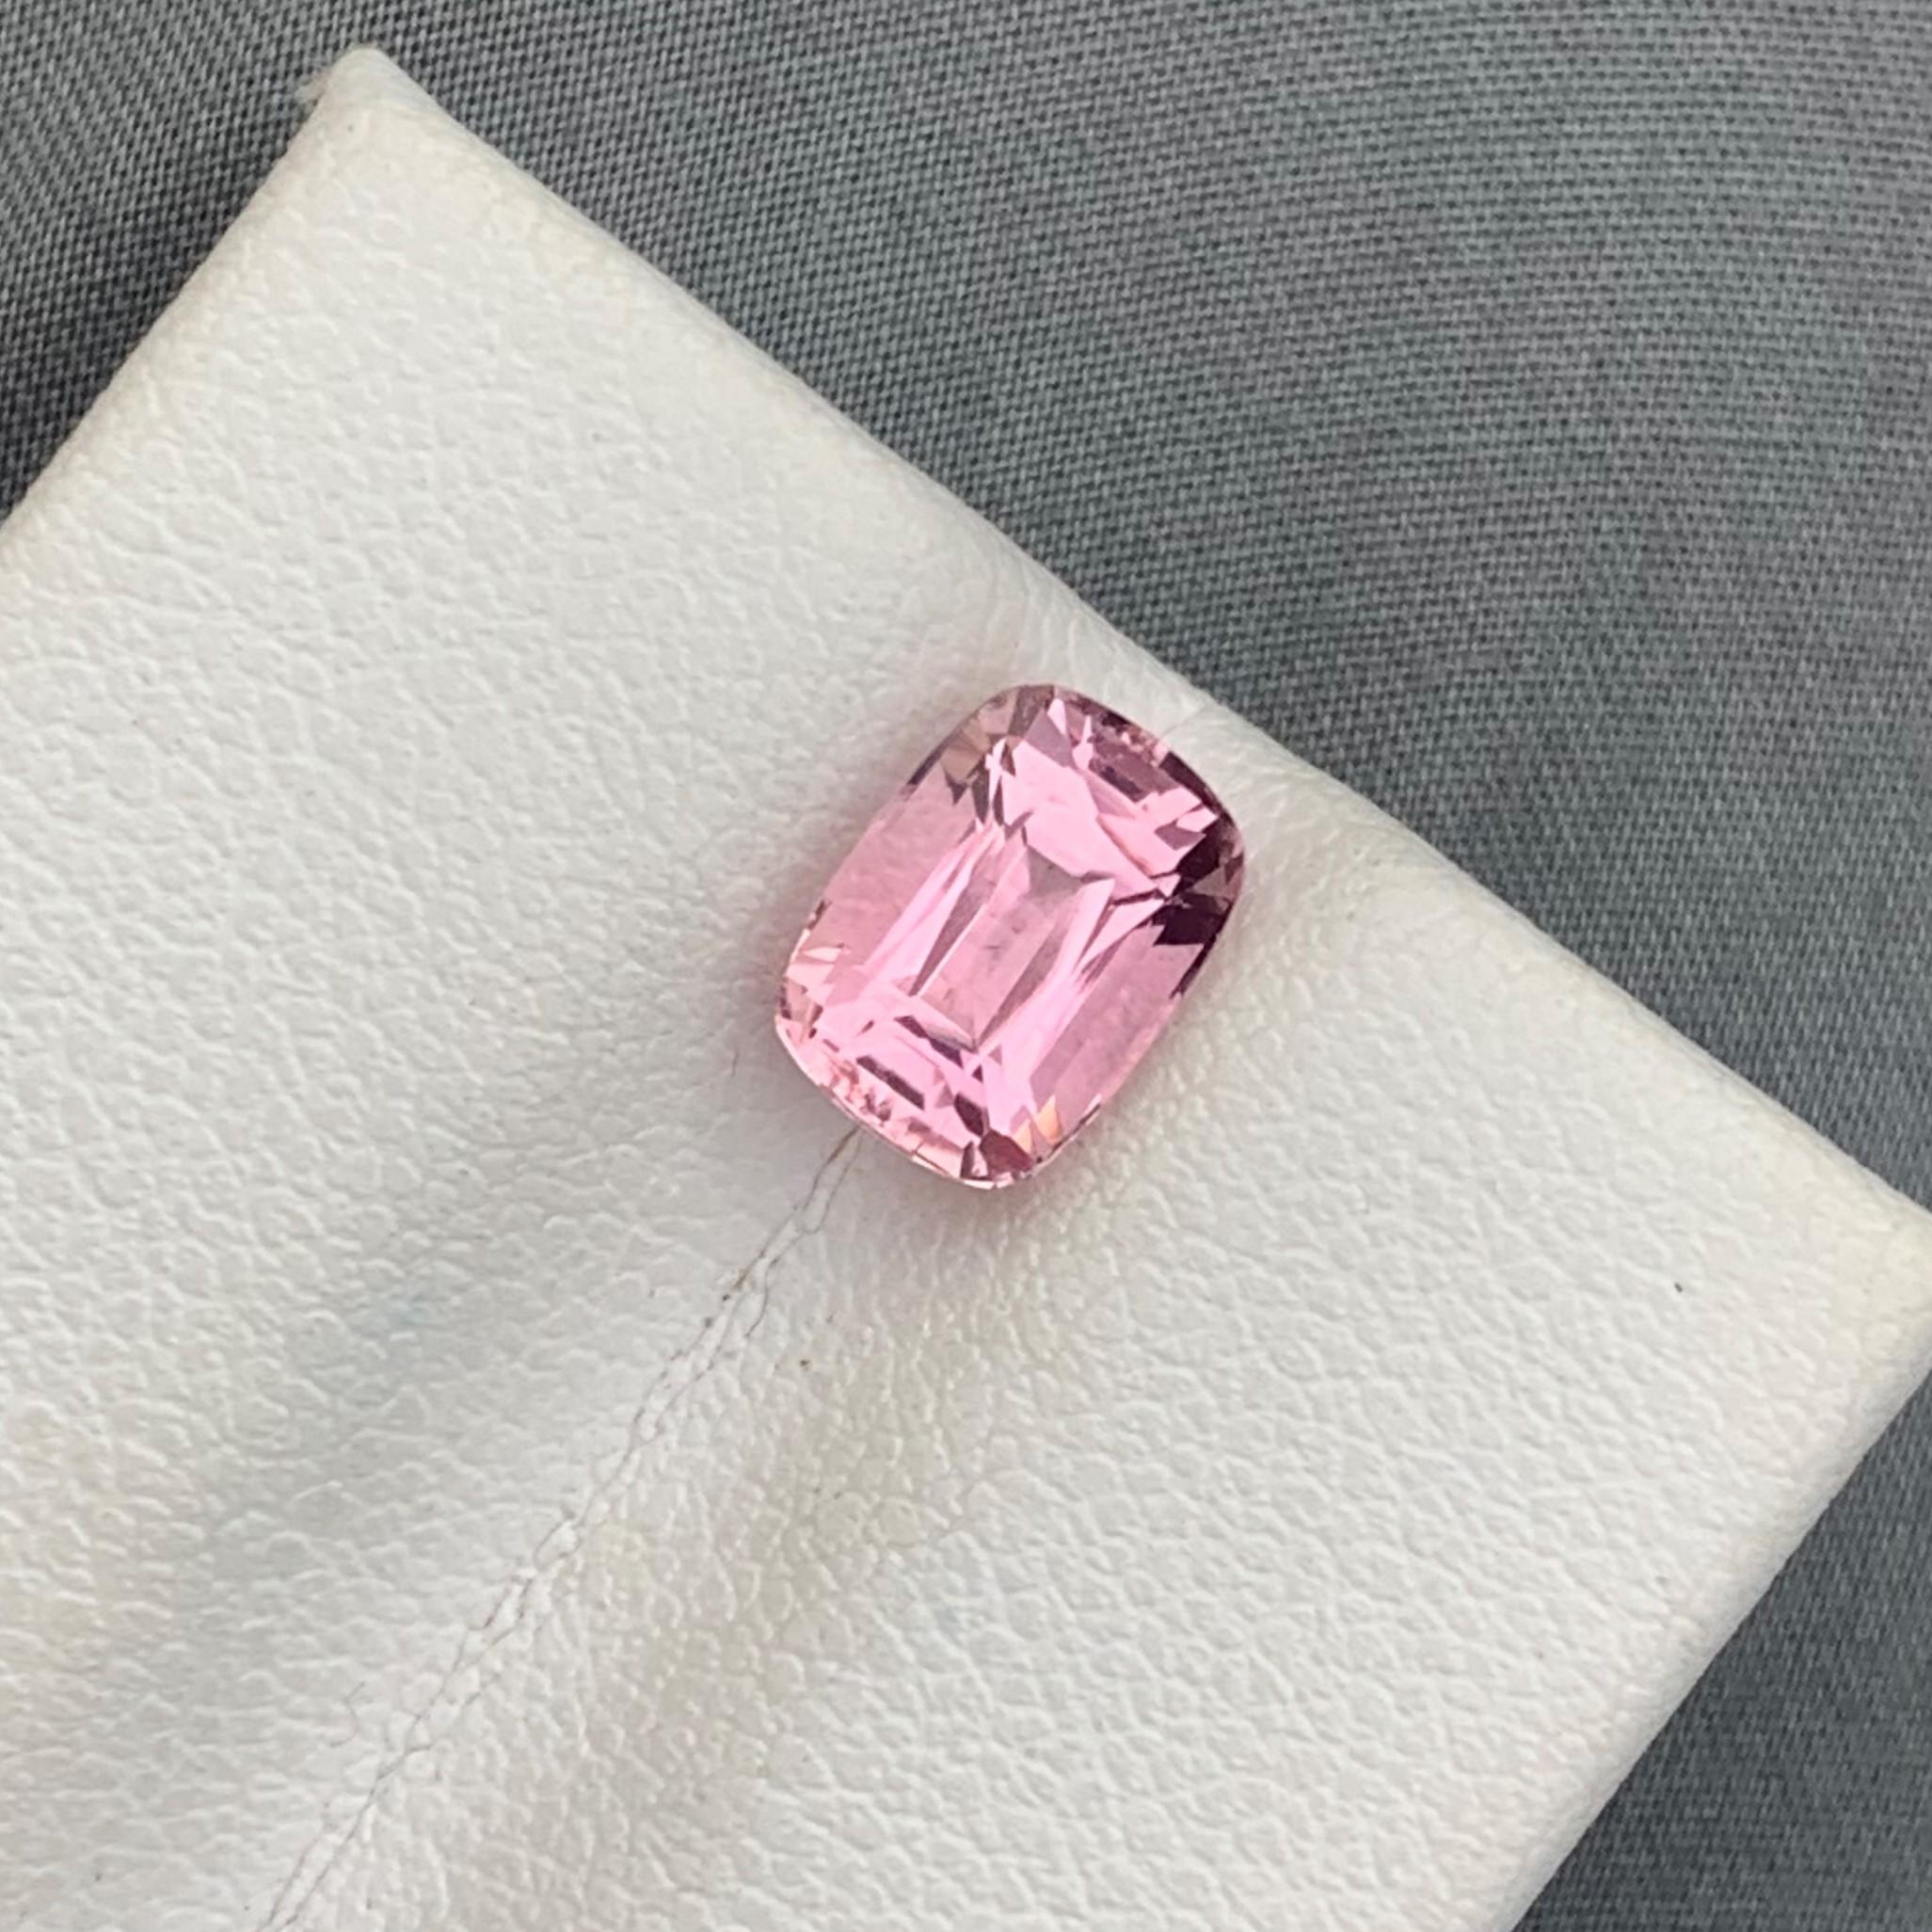 Stunning 1.70 Carat Natural Loose Pink Tourmaline For Ring Jewellery Making For Sale 7